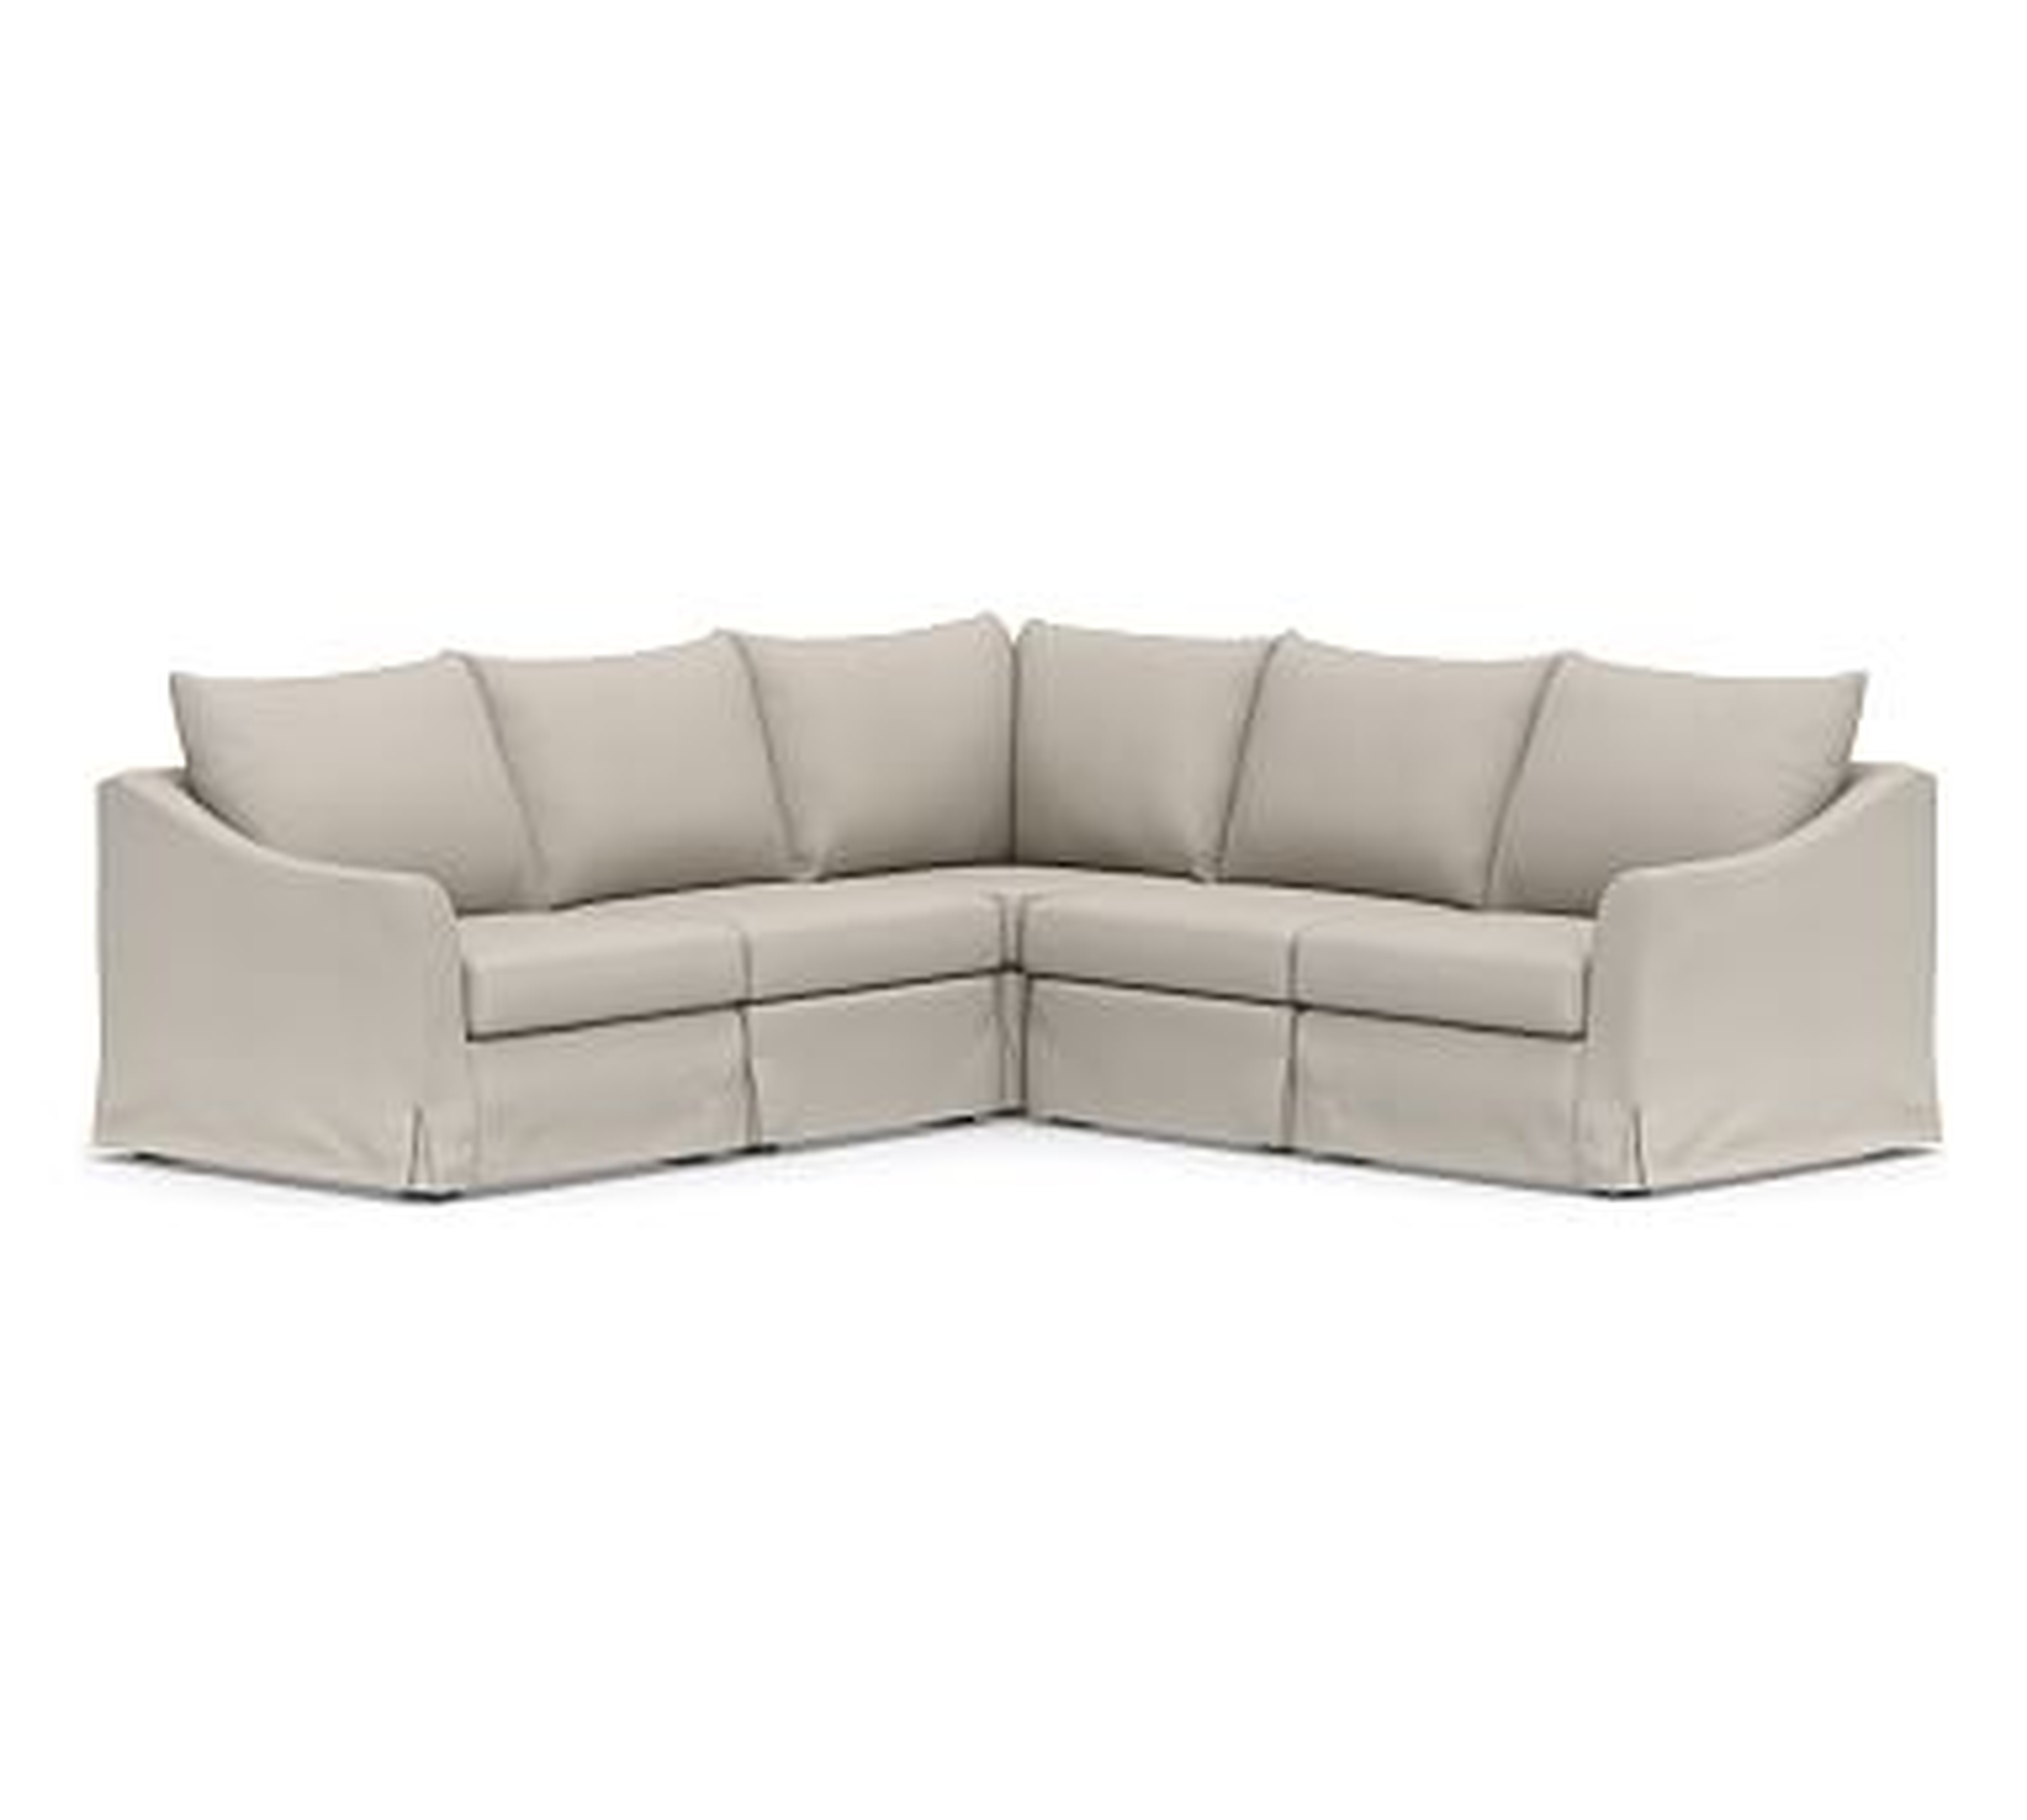 SoMa Brady Slope Arm Slipcovered 5-Piece L-Shaped Sectional, Polyester Wrapped Cushions, Performance Twill Stone - Pottery Barn